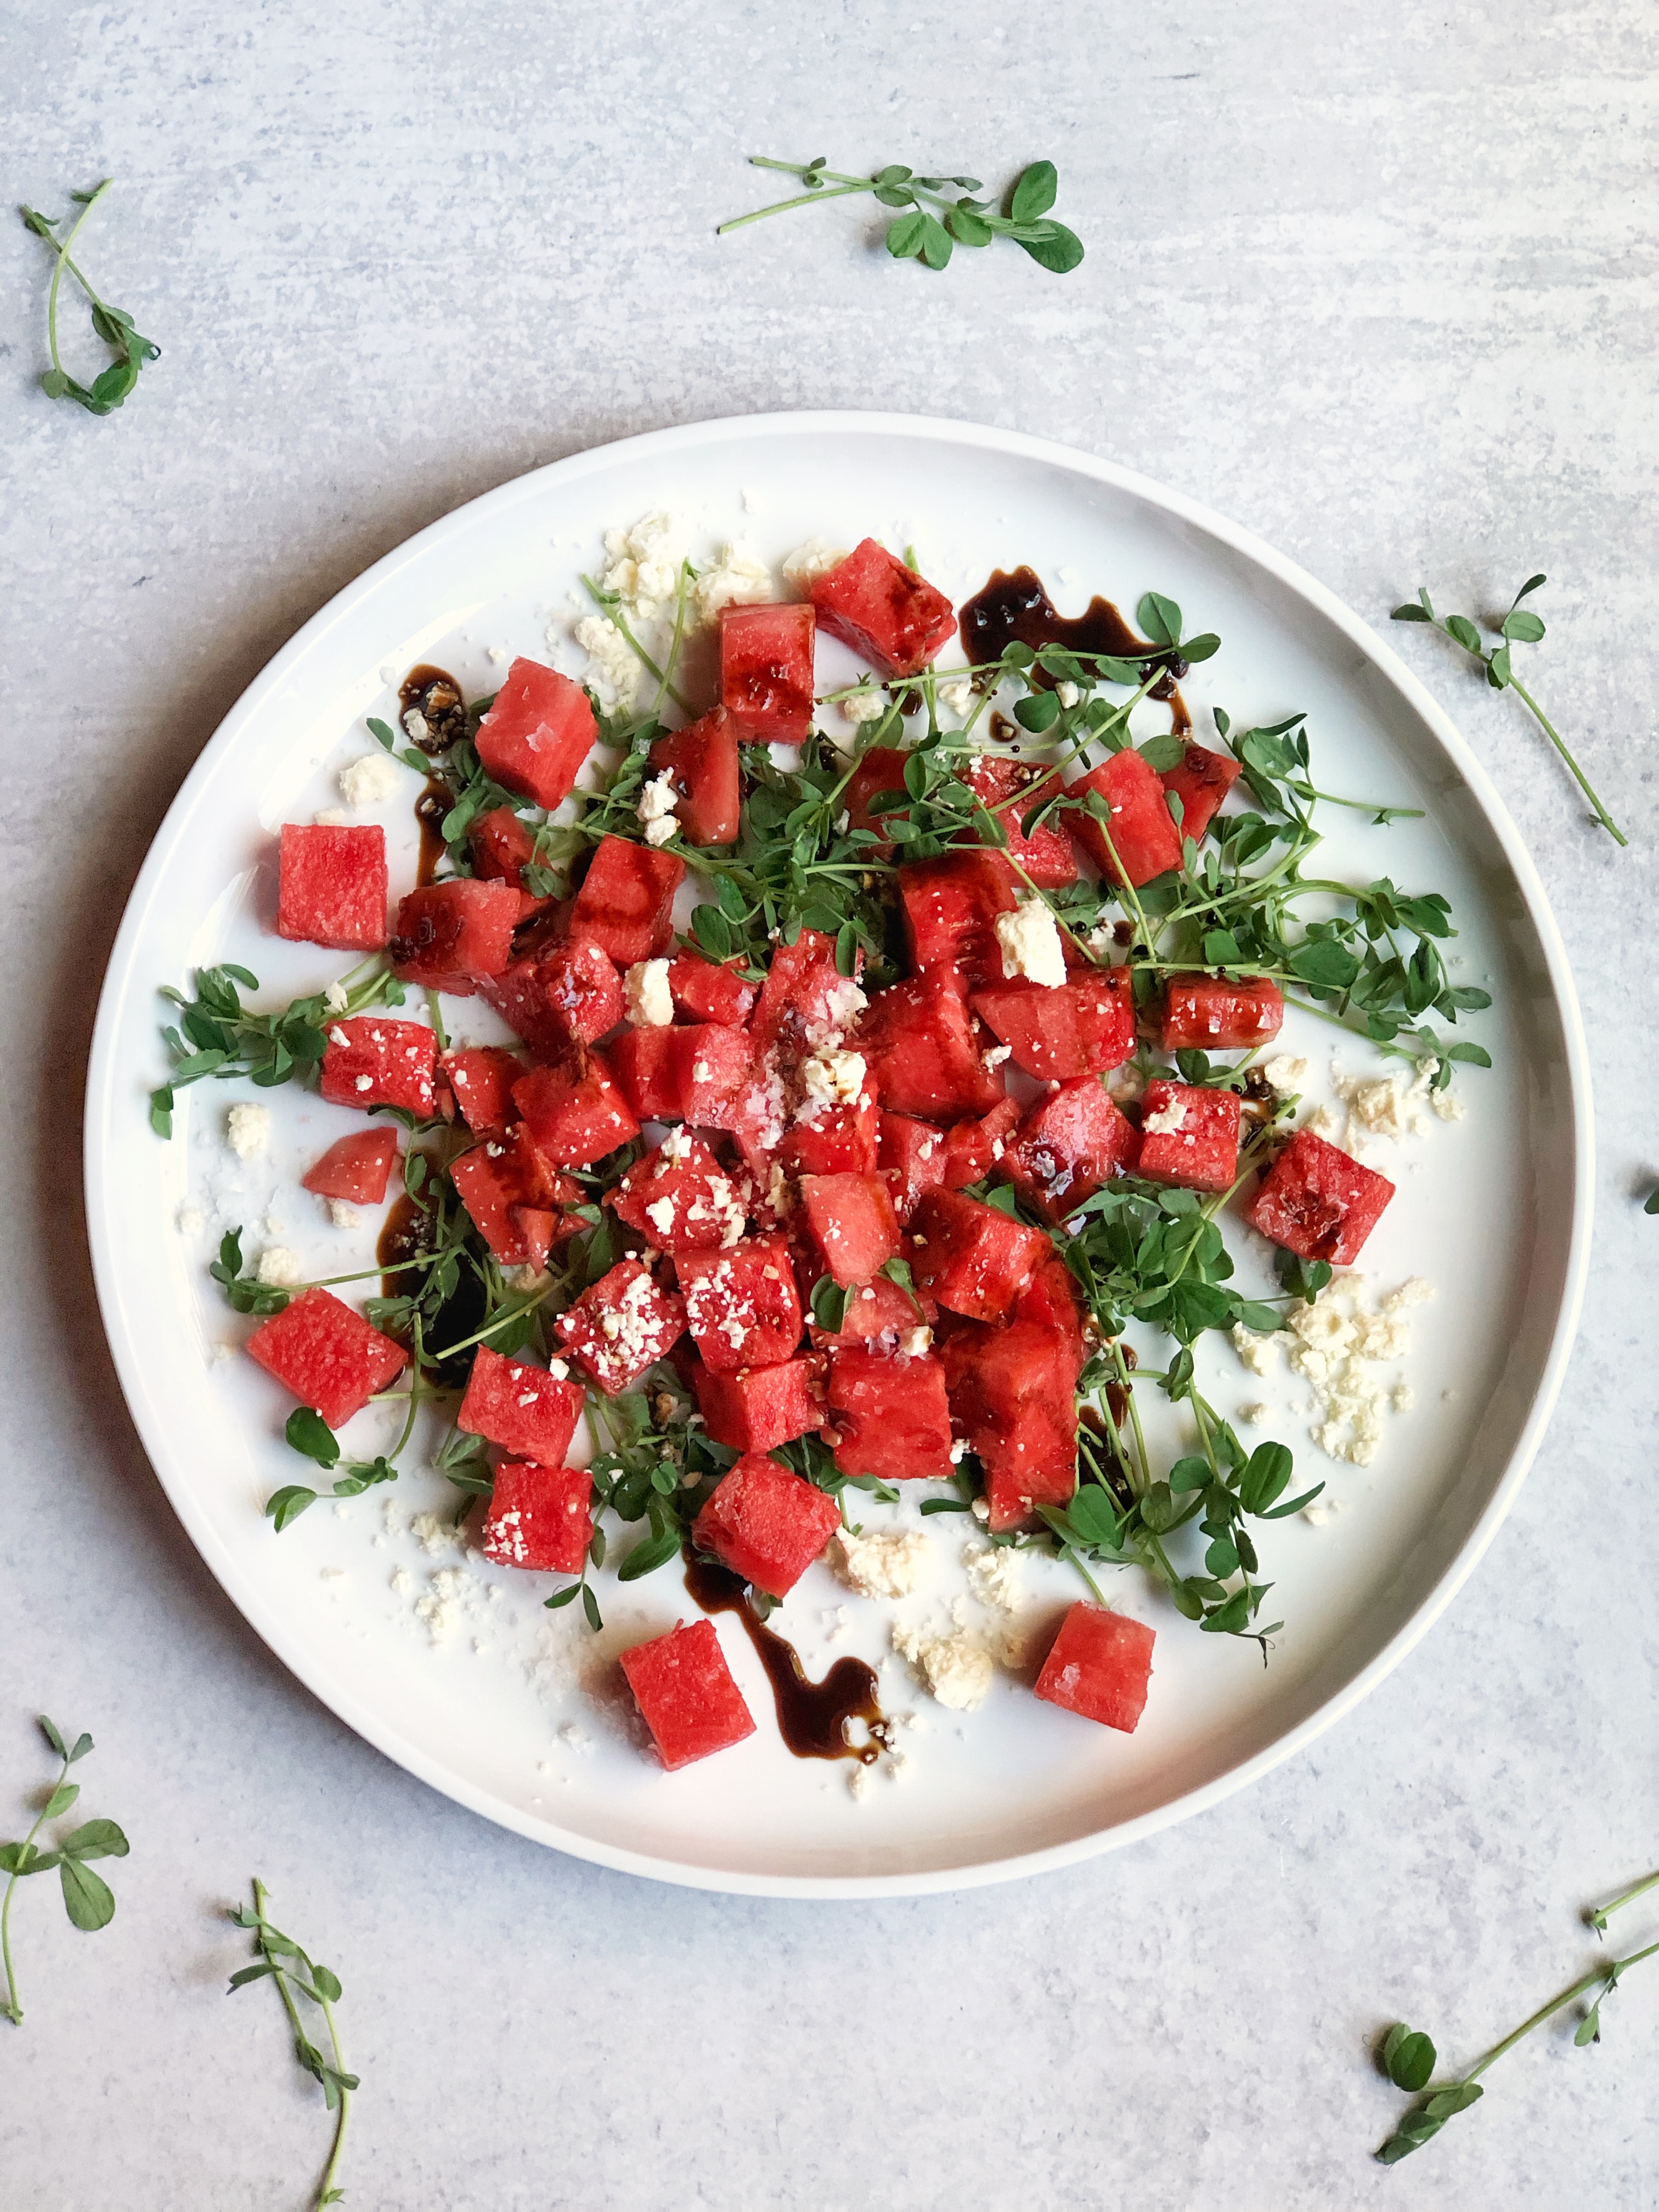 Salted Watermelon Salad with crumbled feta, pea shoots and aged balsamic